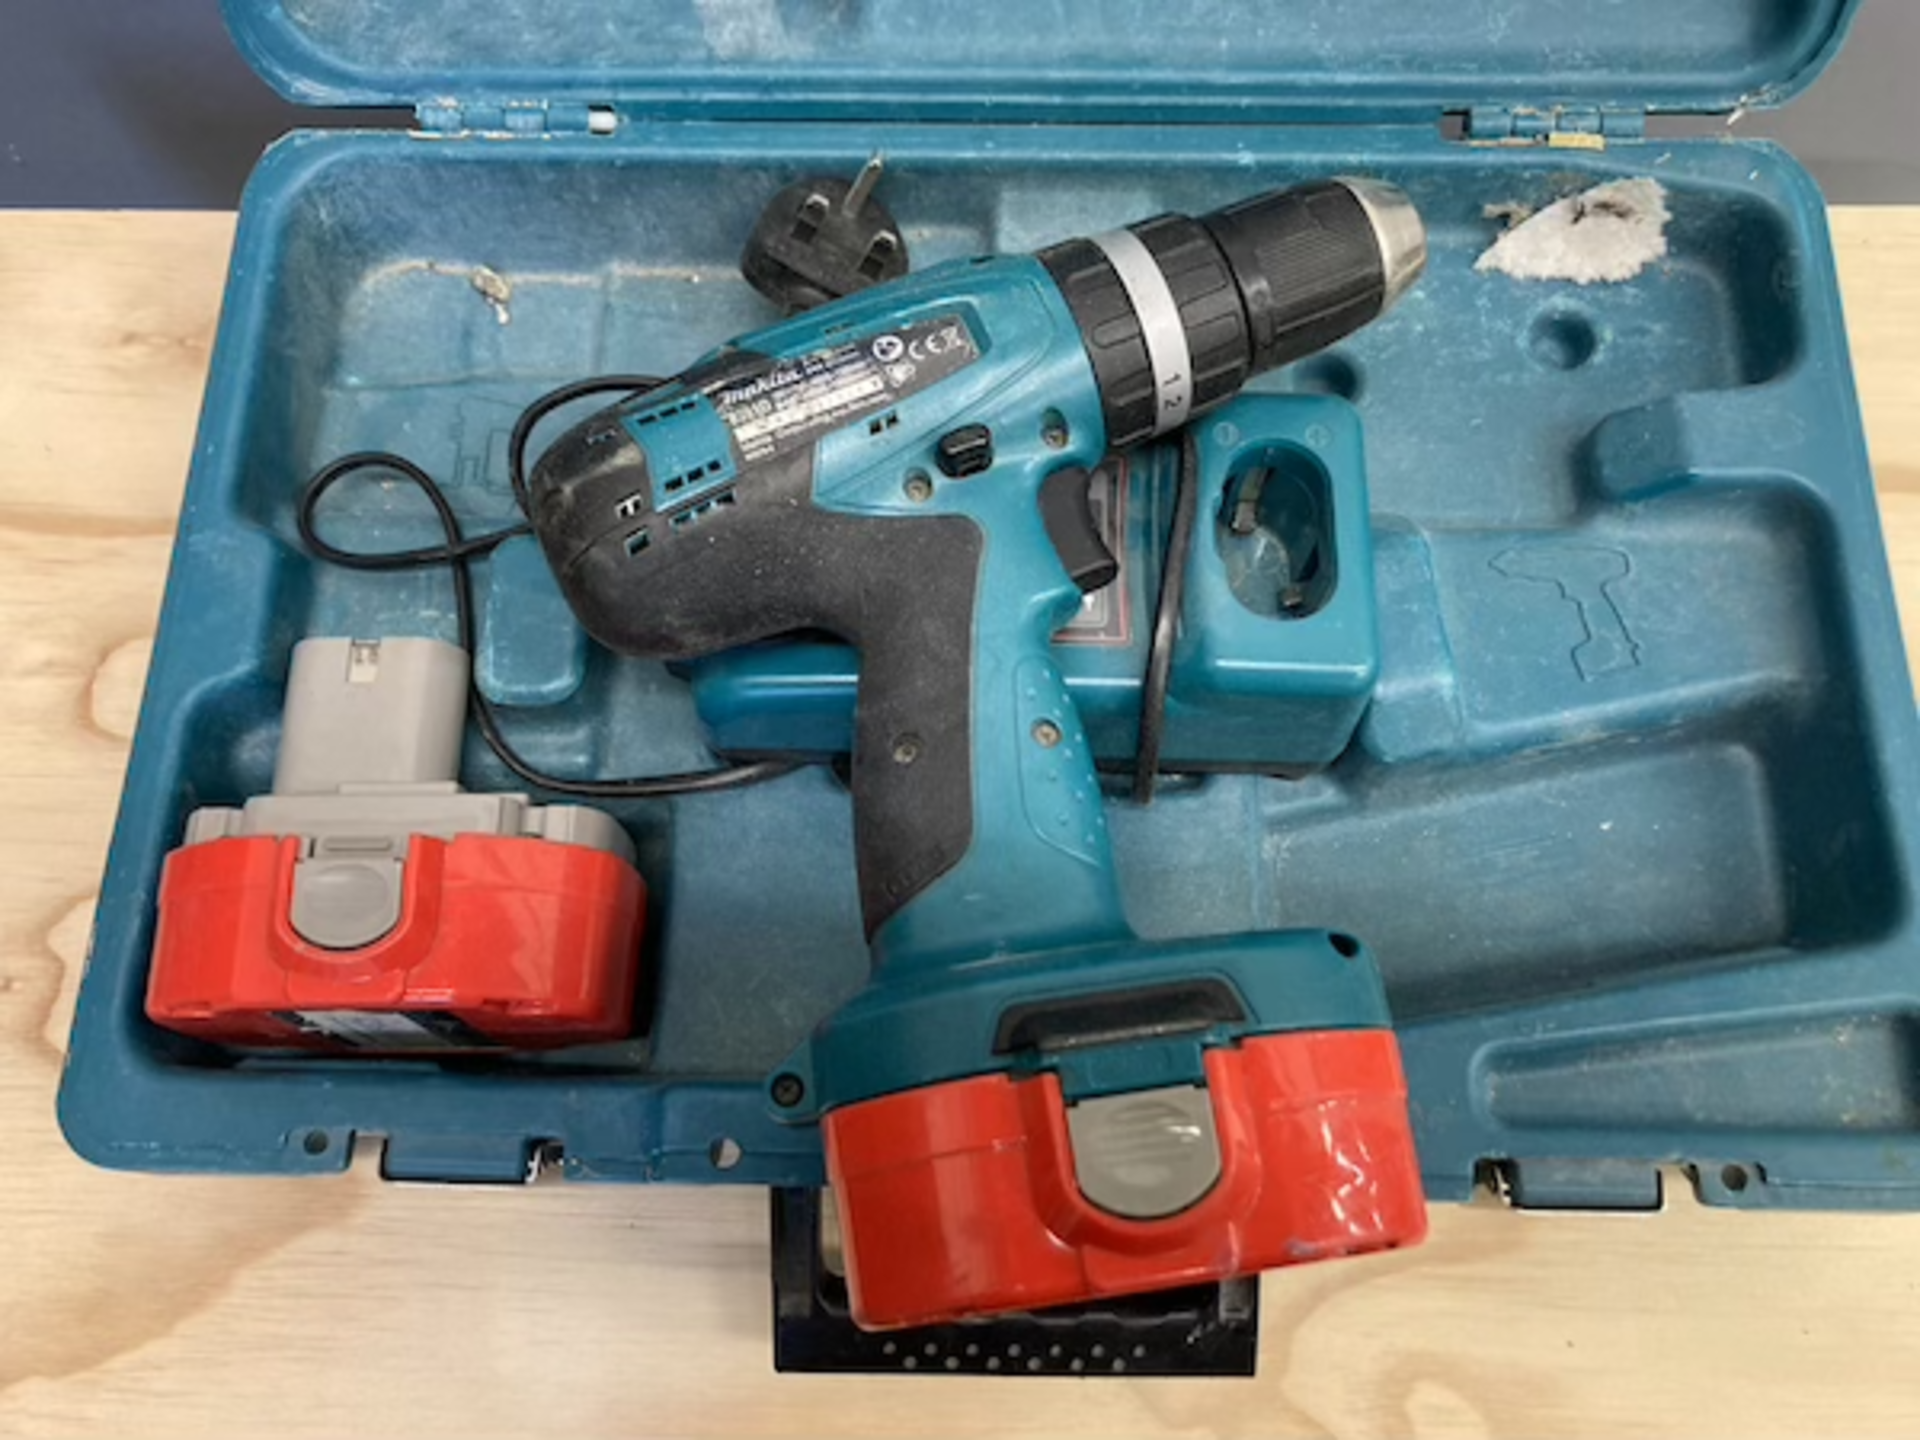 Makita 8391D cordless hammer drill with two batteries - Image 2 of 3